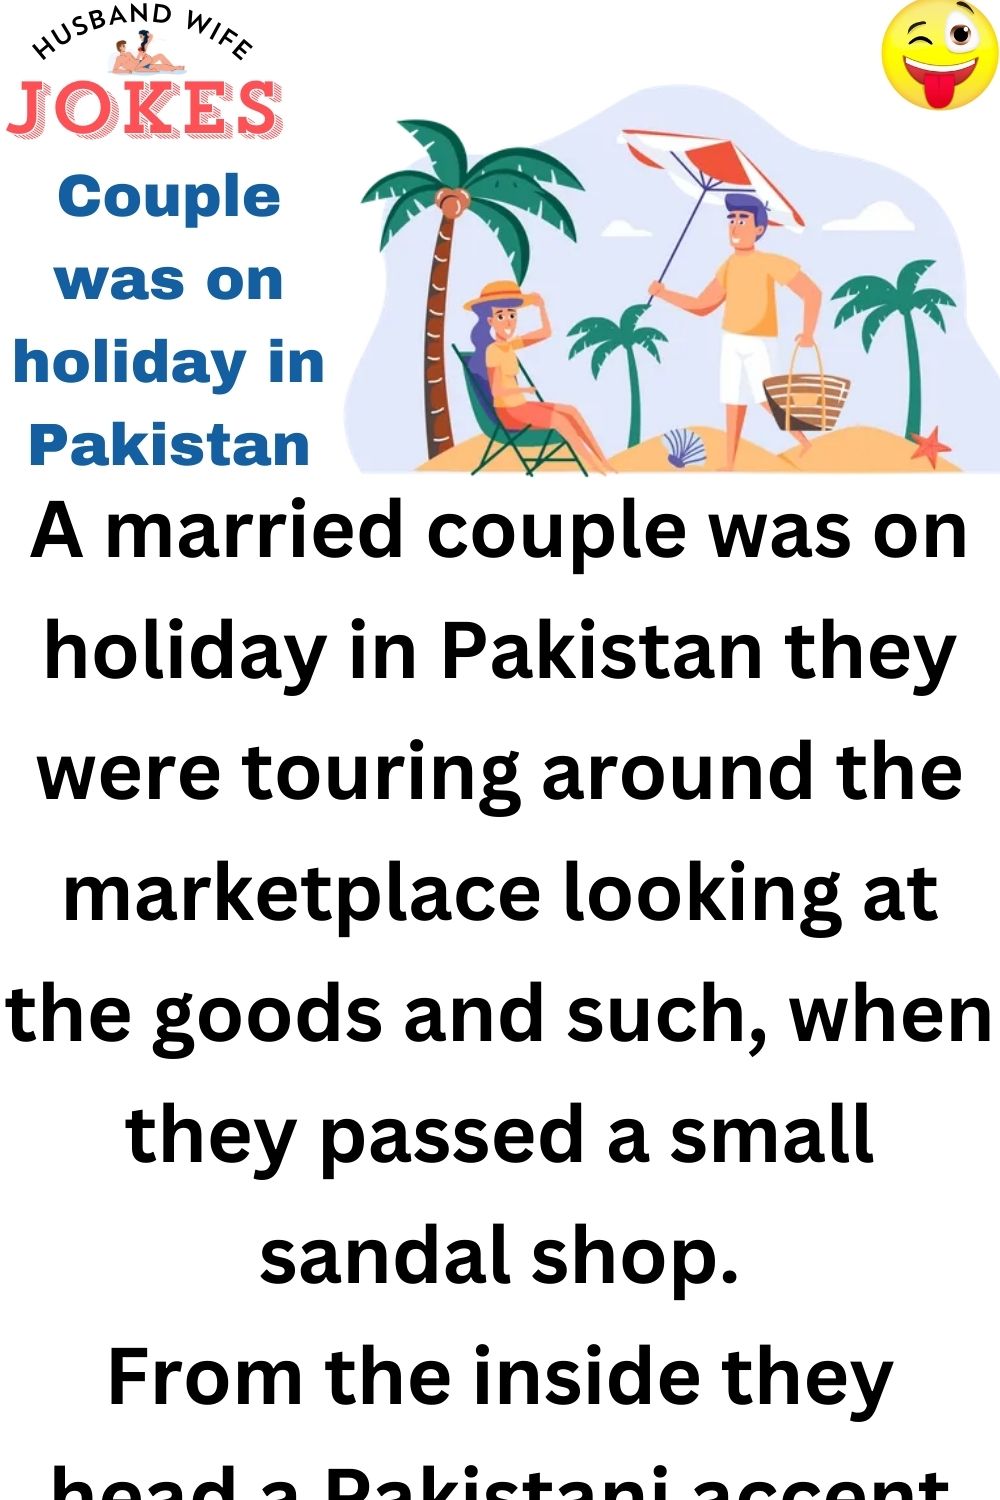 Couple was on holiday in Pakistan